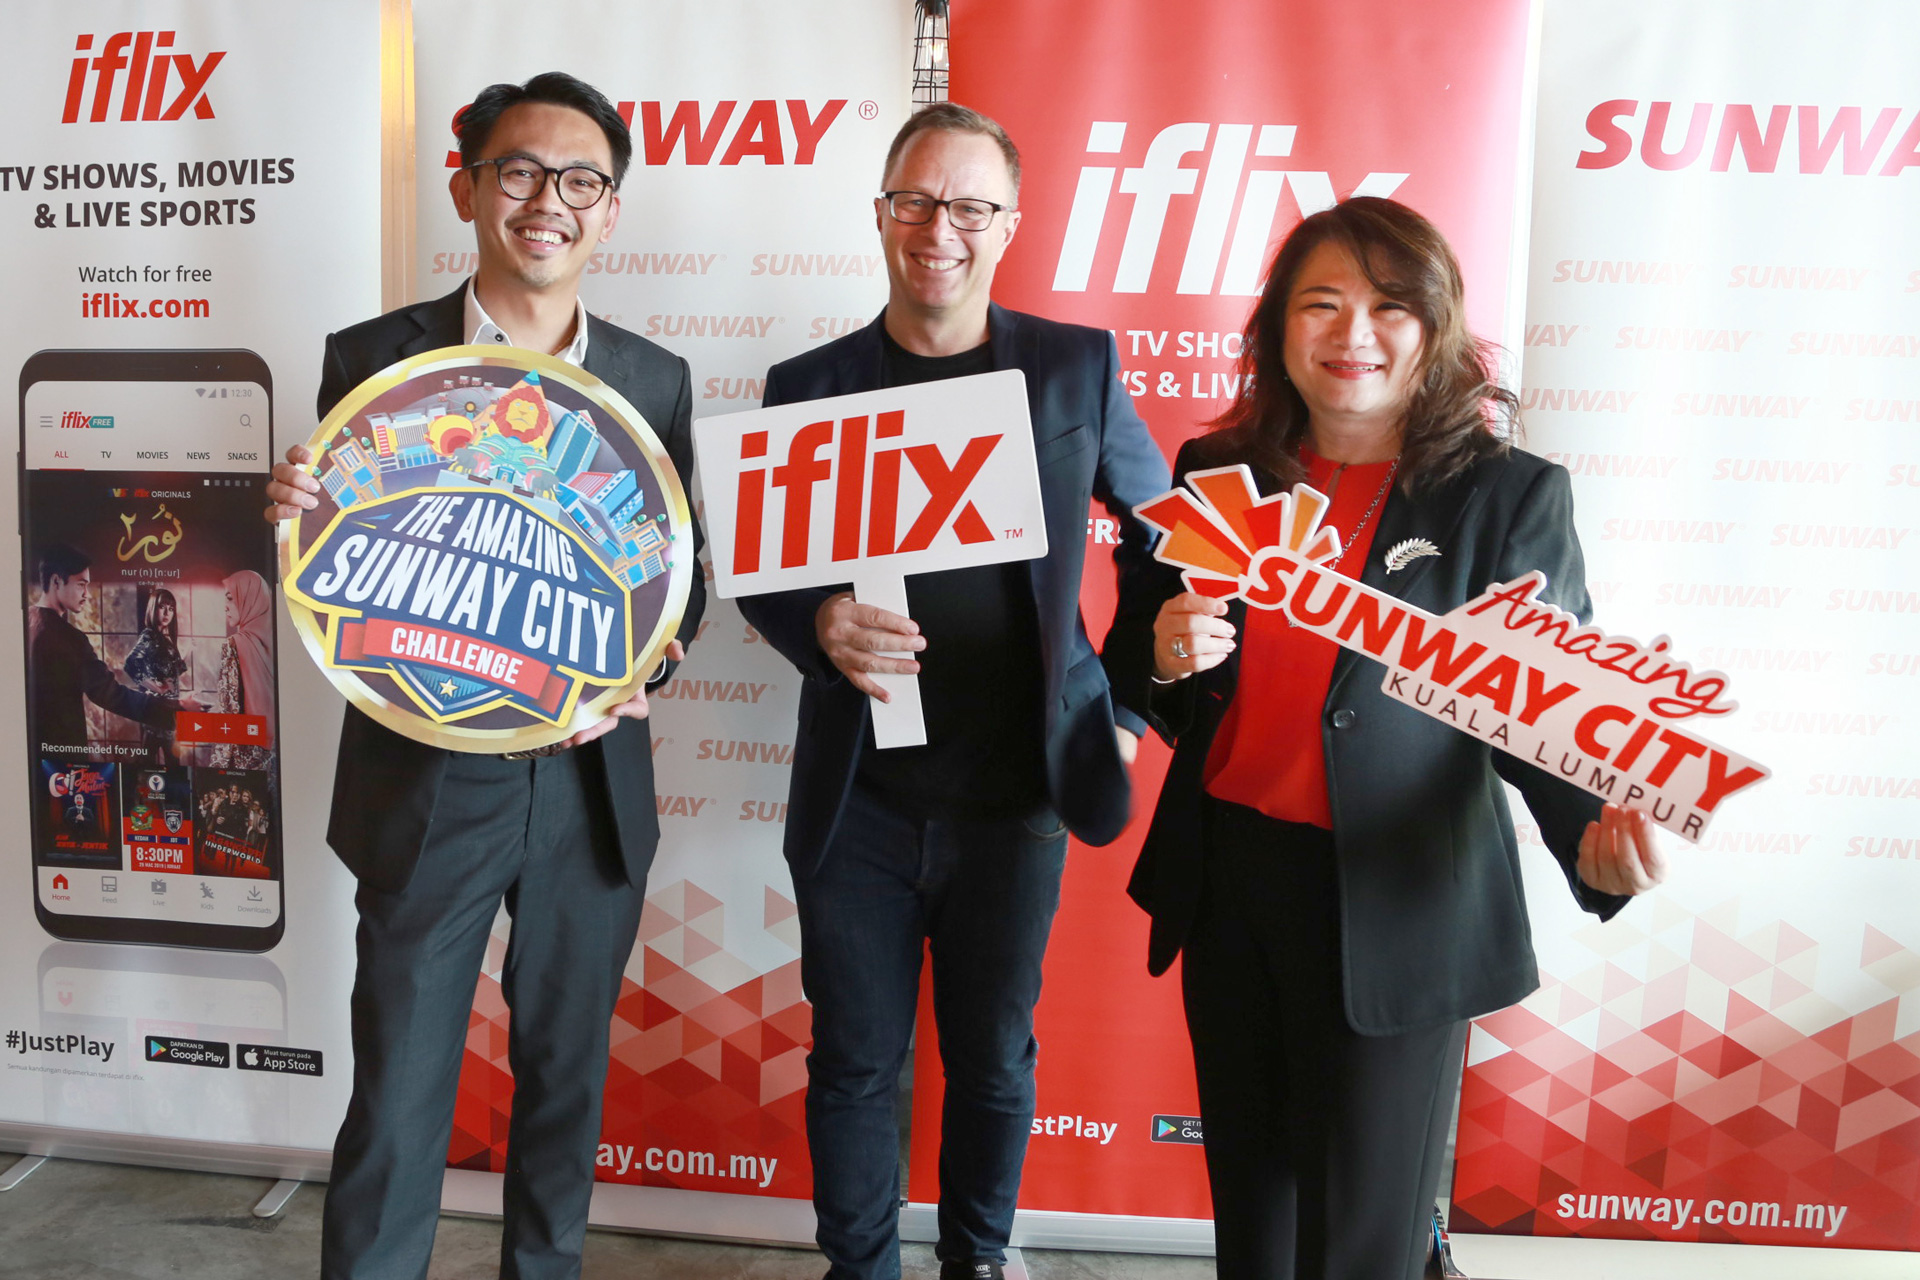 The Amazing Sunway City Challenge Reality Show to Air on IFLIX